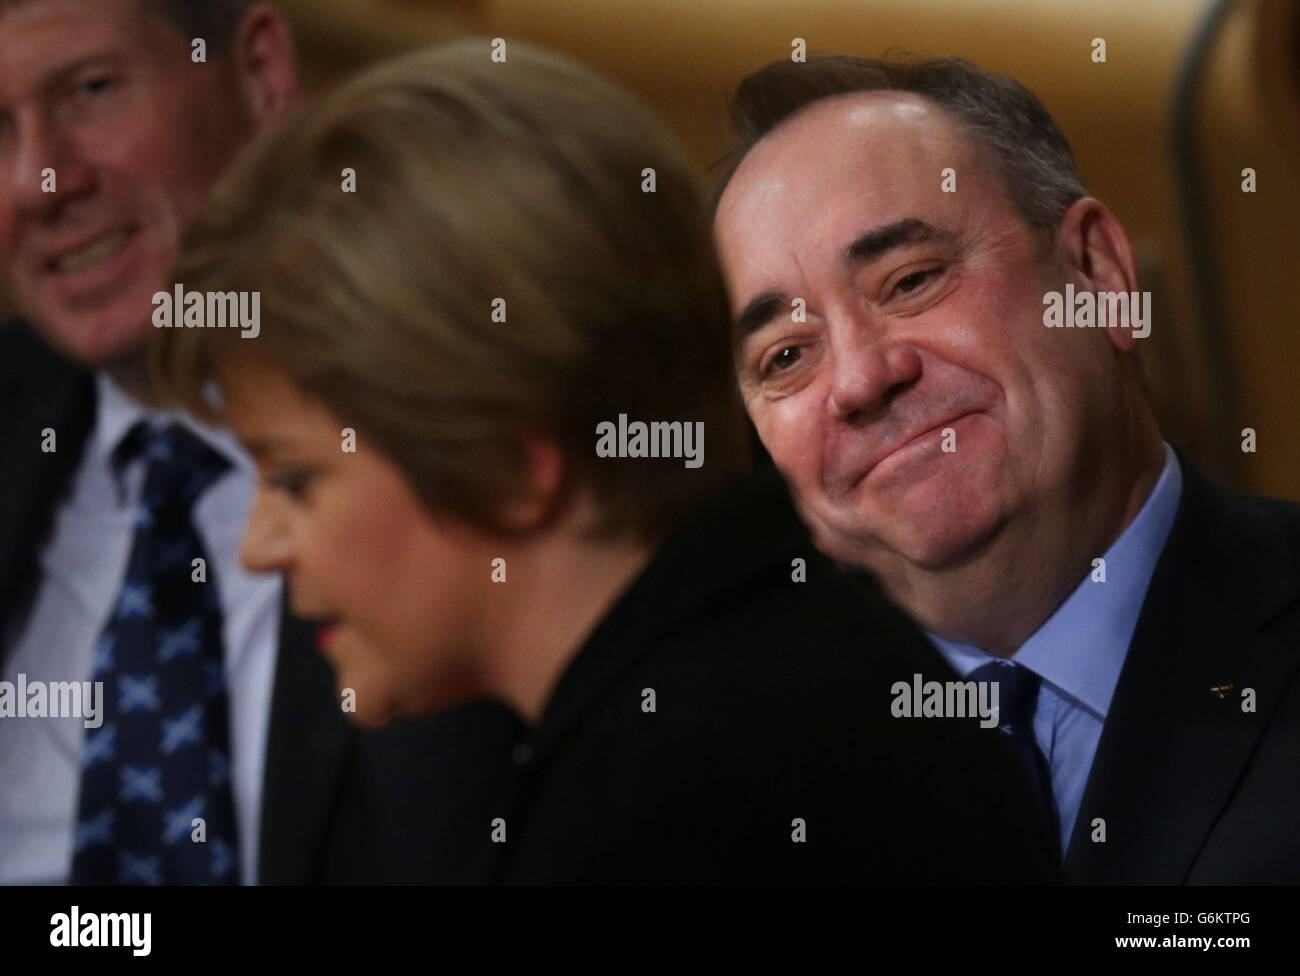 Deputy First Minister Nicola Sturgeon and First Minister Alex Salmond during the debate on the Scottish Government's white paper on independence at the Scottish Parliament, Edinburgh. The Scottish Government has published its white paper outlining how it believes a Yes vote in next year's referendum could pave the way for a new era for the nation. Stock Photo